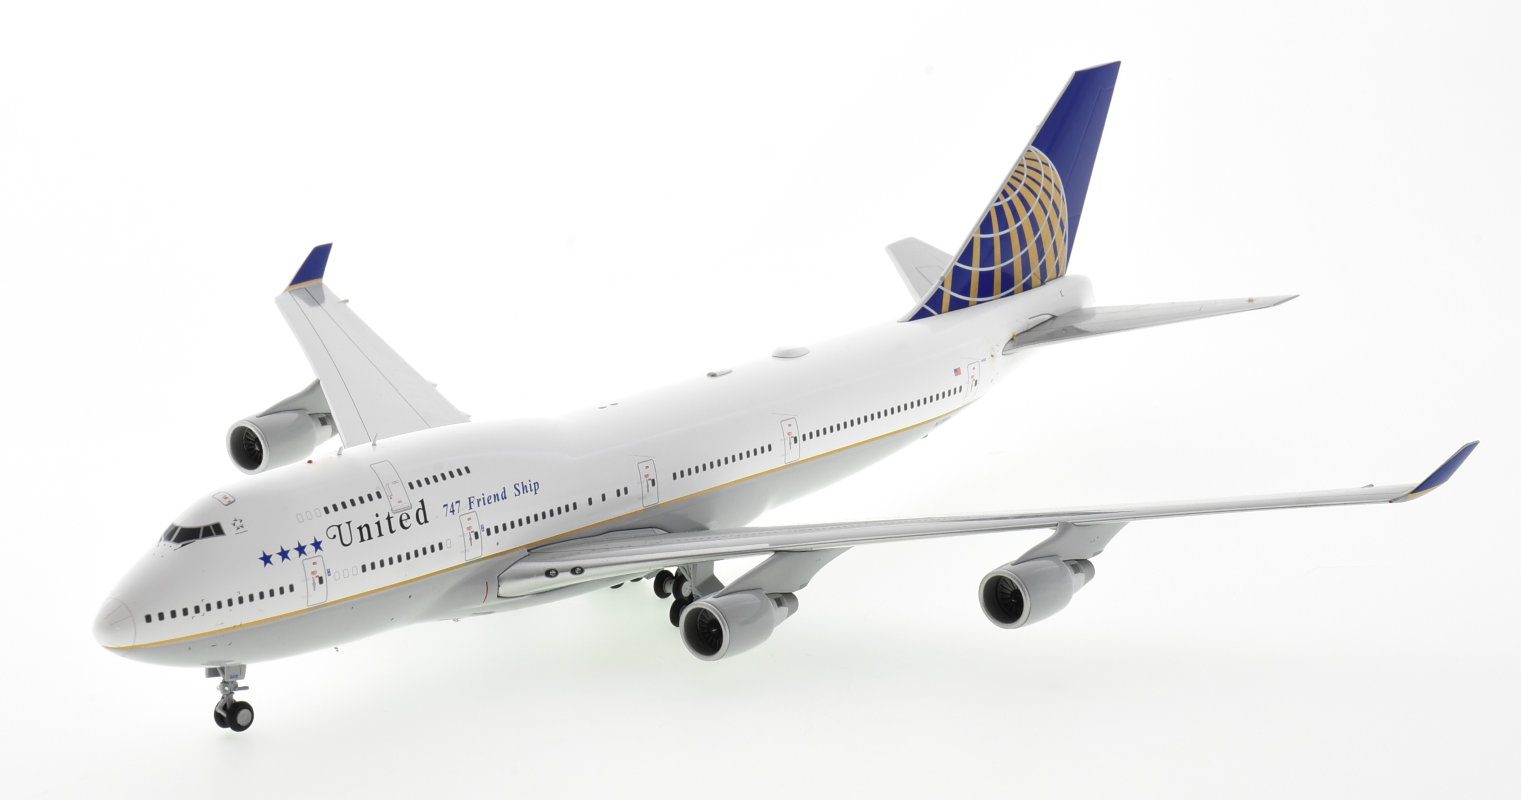 Front port side view of JC Wings JC2UAL203 - Boeing 747-400 1/200 scale diecast model, registration N118UA, in United Airlines final B747 flight livery featuring the airline's iconic 